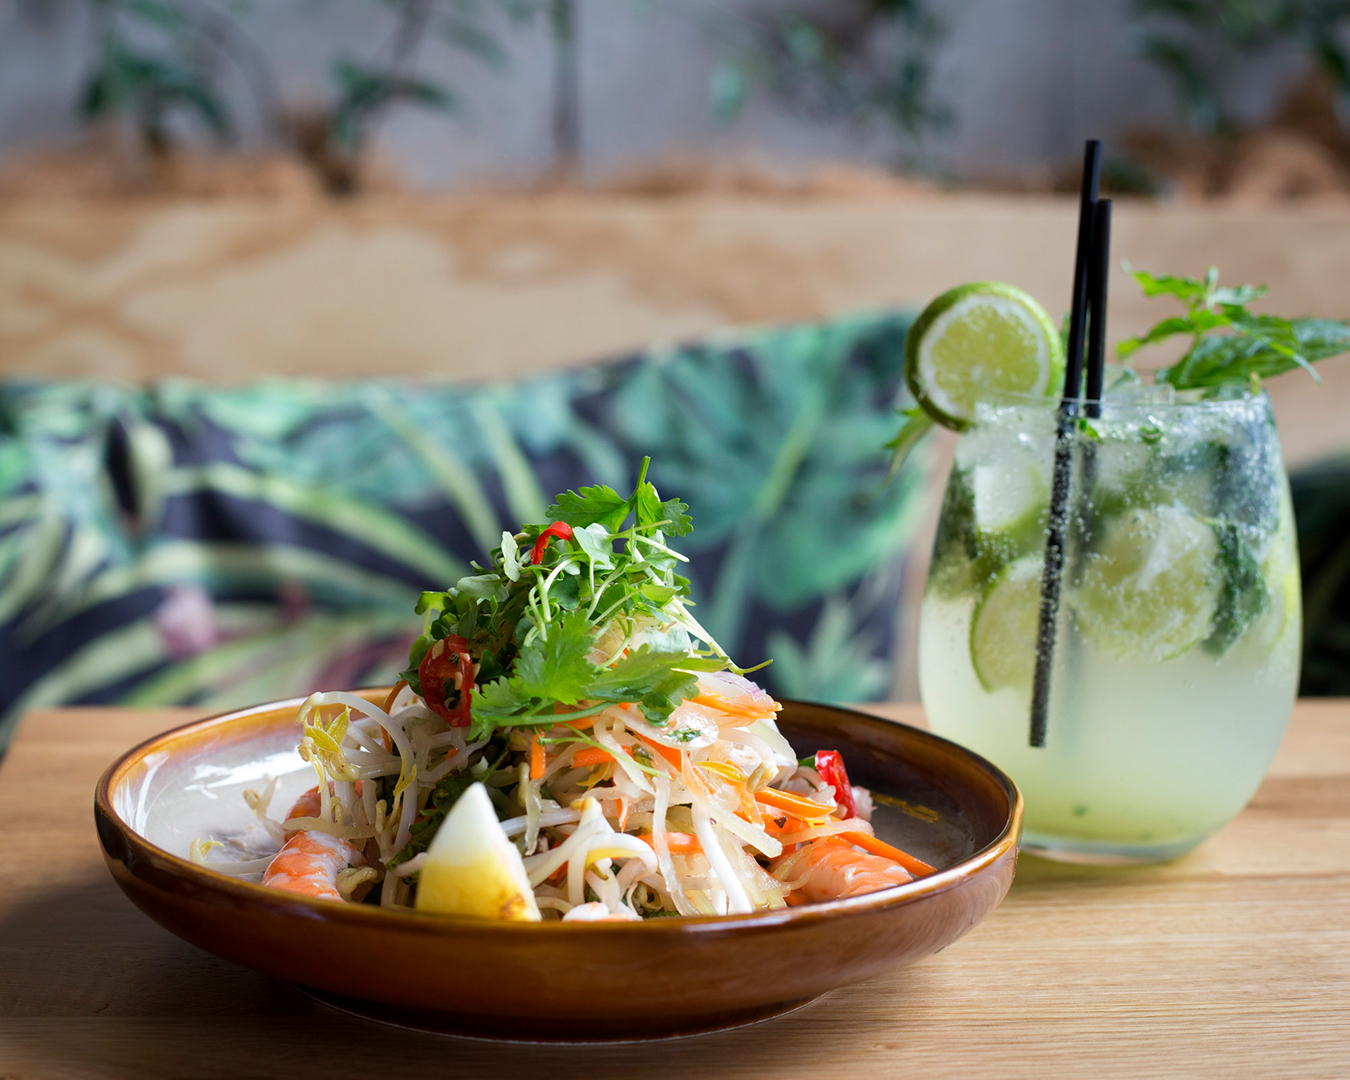 A delicate noodle dish stands alongside a delicious looking cocktail.